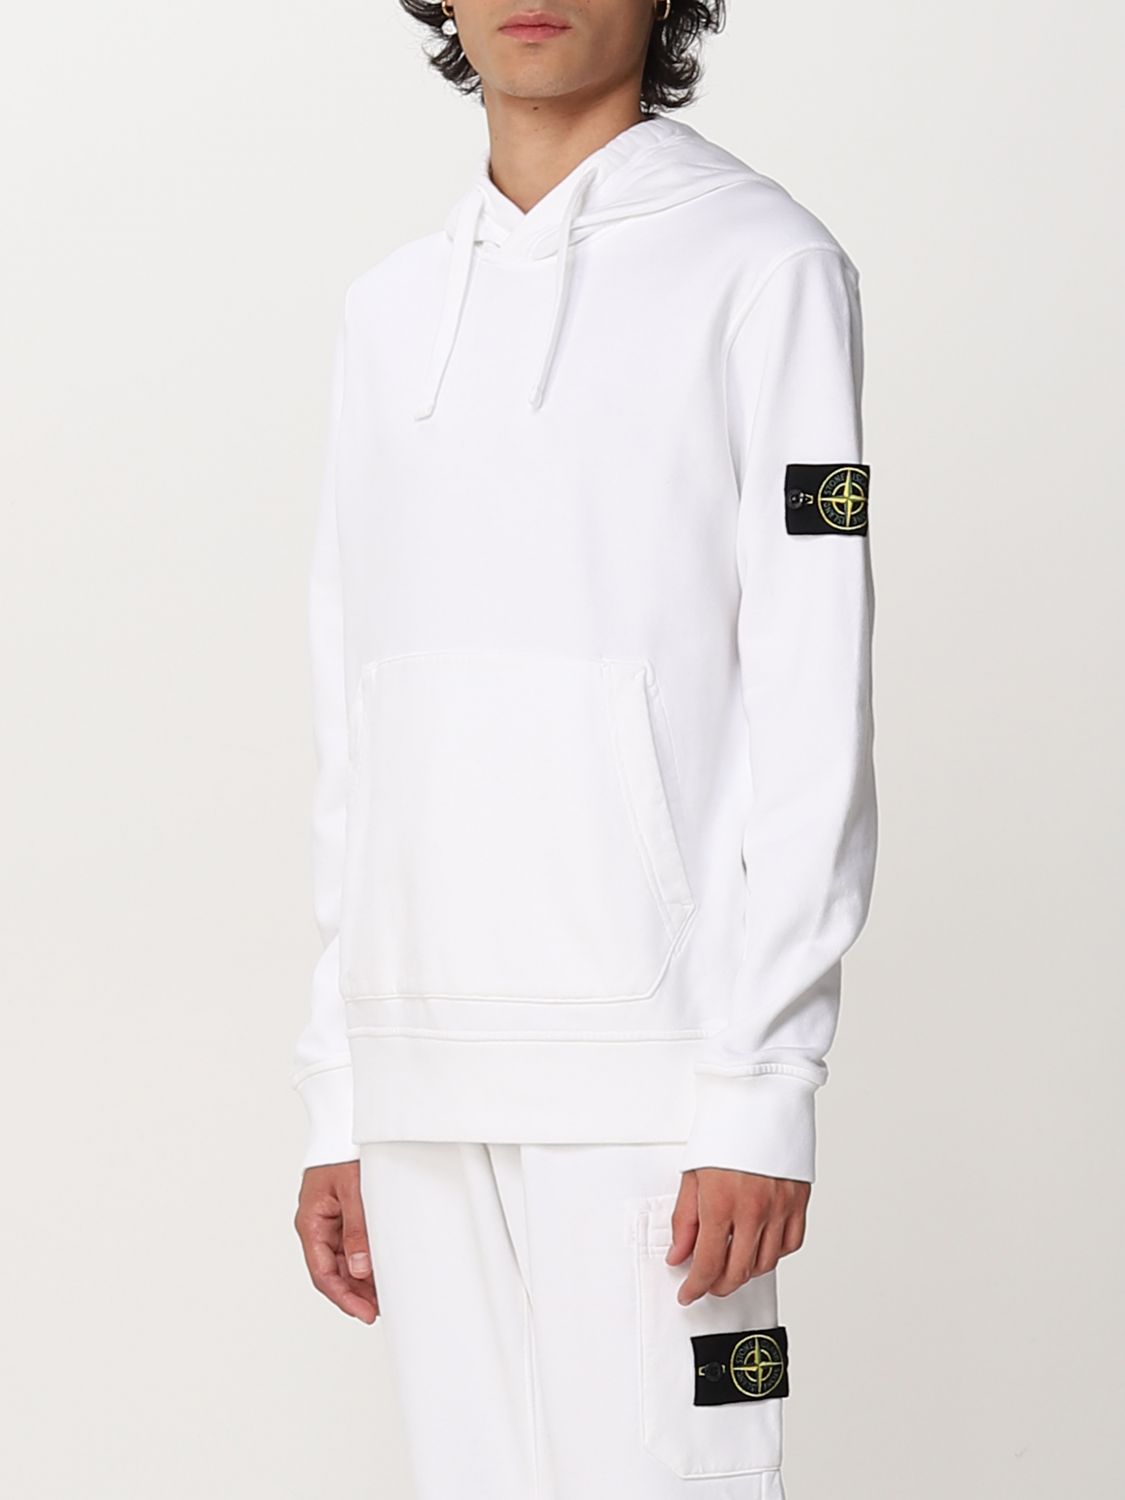 Stone Island Outlet: sweatshirt for man - White Stone Island sweatshirt 64120 online on GIGLIO.COM